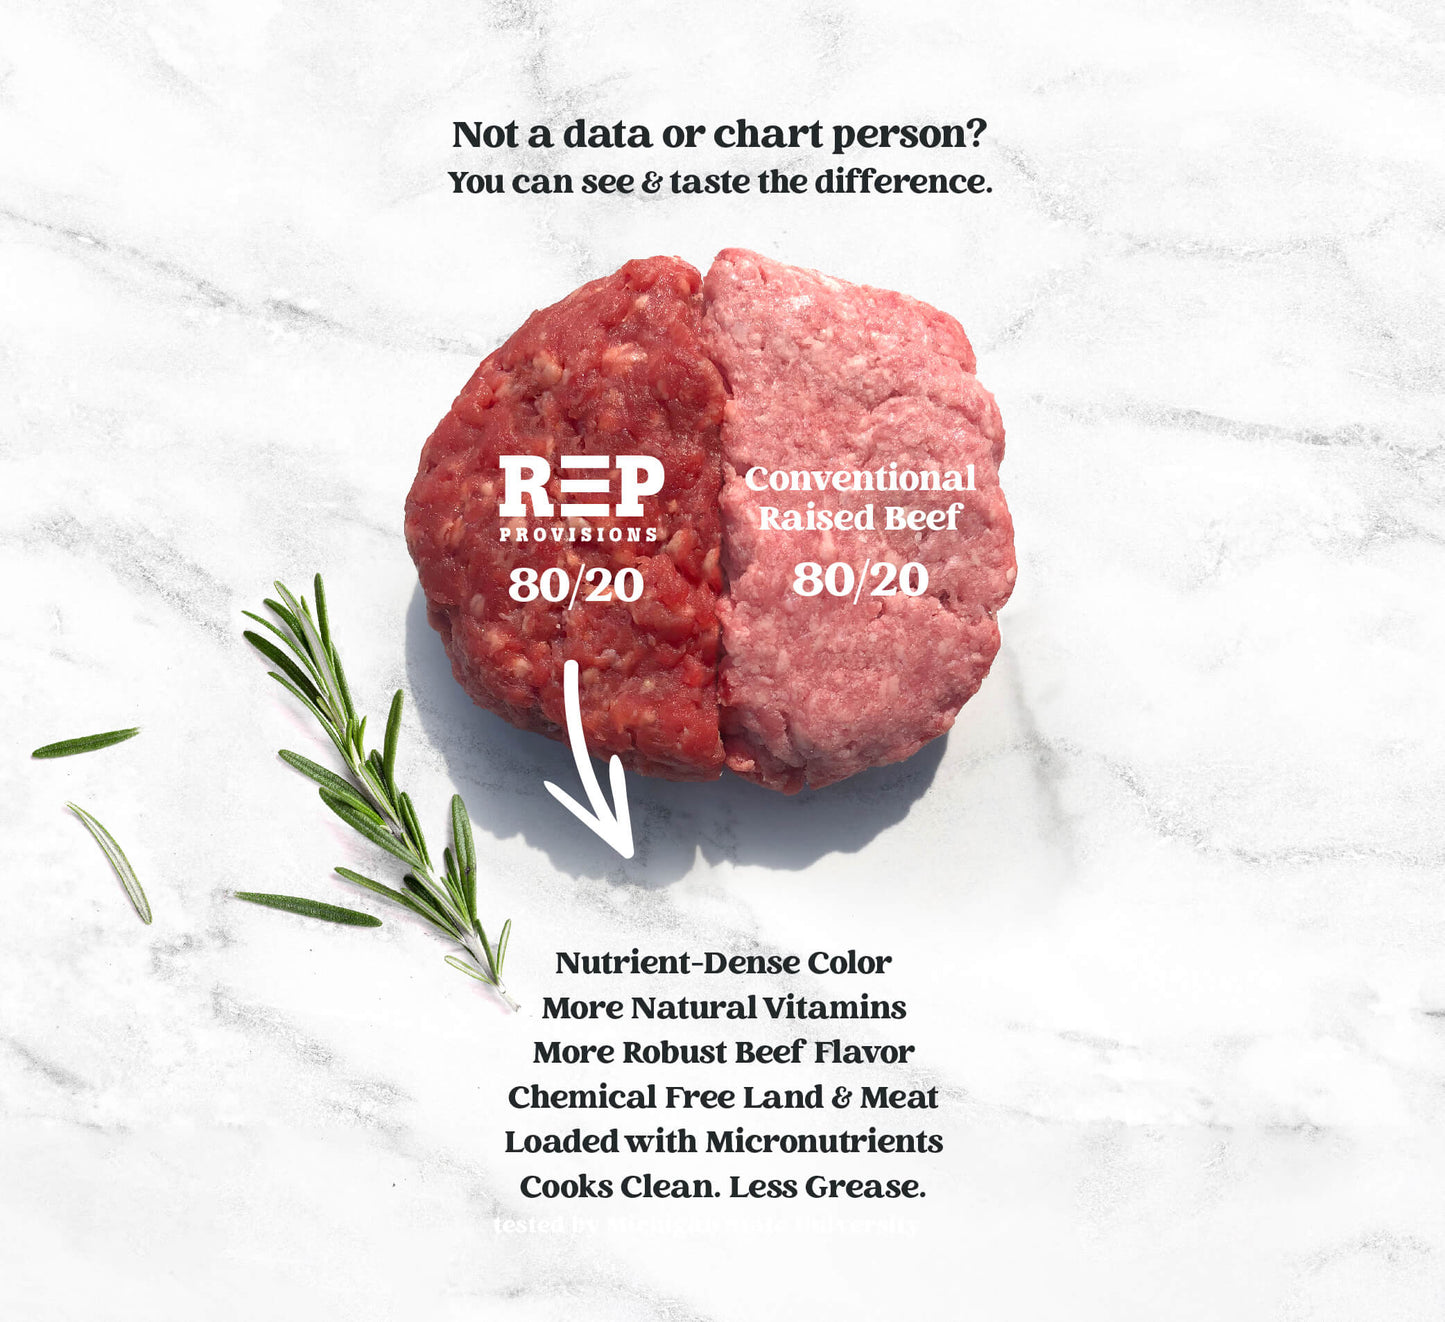 Raising Grass Fed Beef - What You Need to Know on Butcher Day